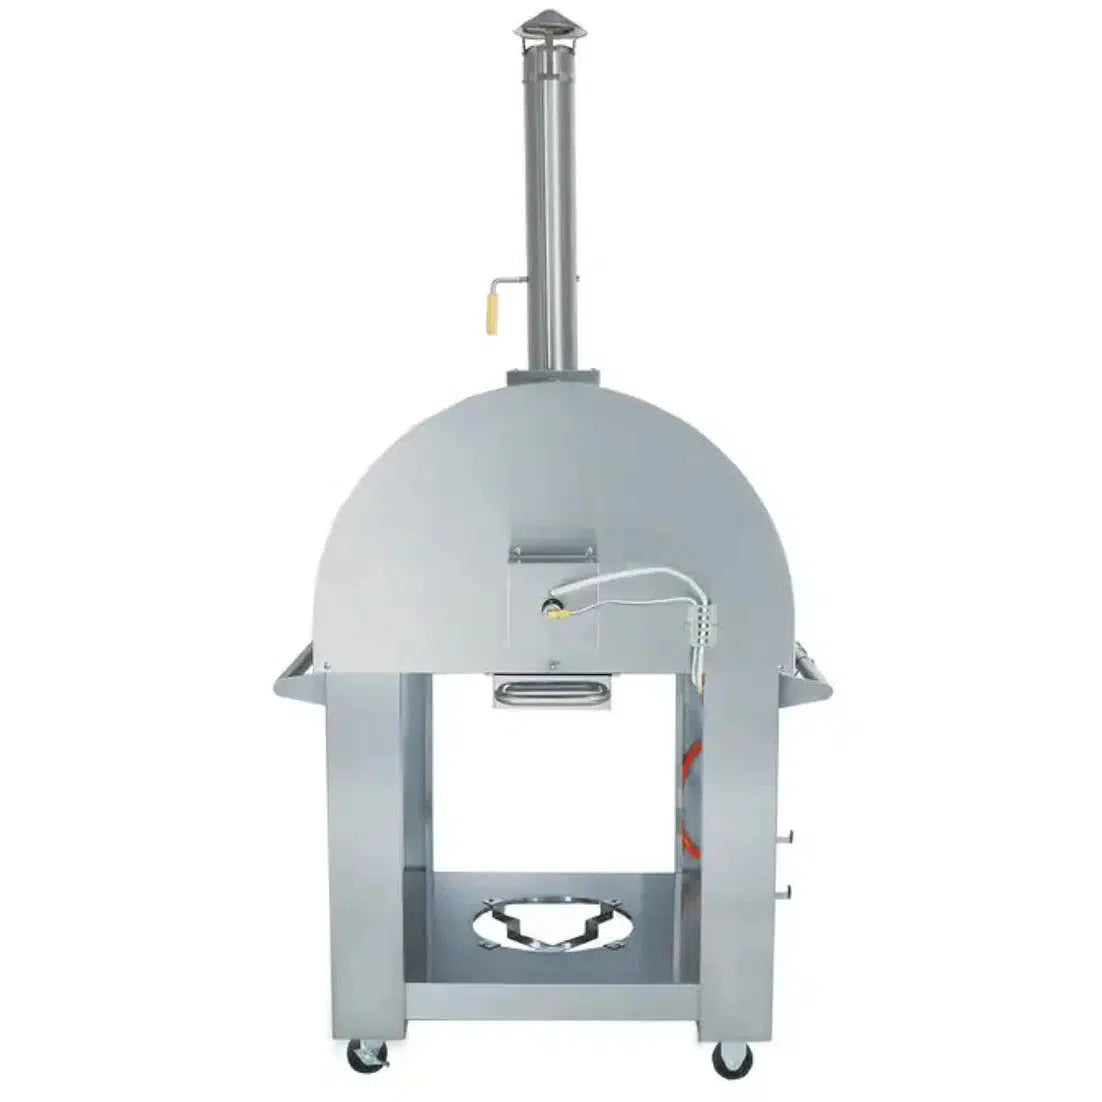 Kokomo Grills 32" Dual Fuel Liquid Propane or Wood Fired Stainless Steel Pizza Oven